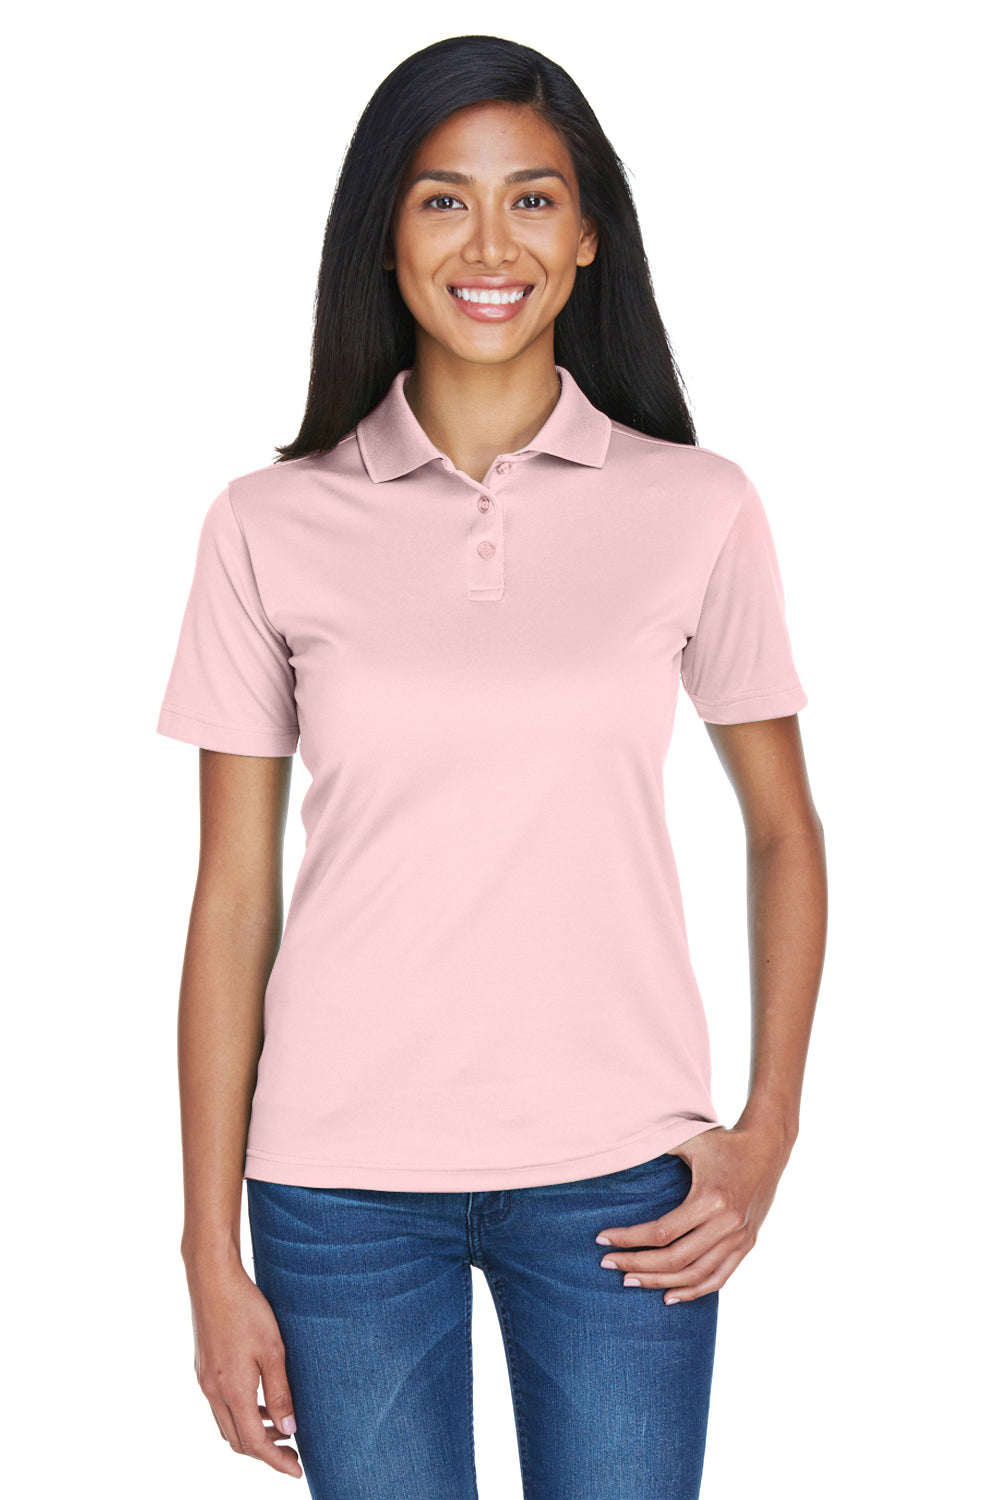 UltraClub 8404 Womens Cool & Dry Moisture Wicking Short Sleeve Polo Shirt Pink Front